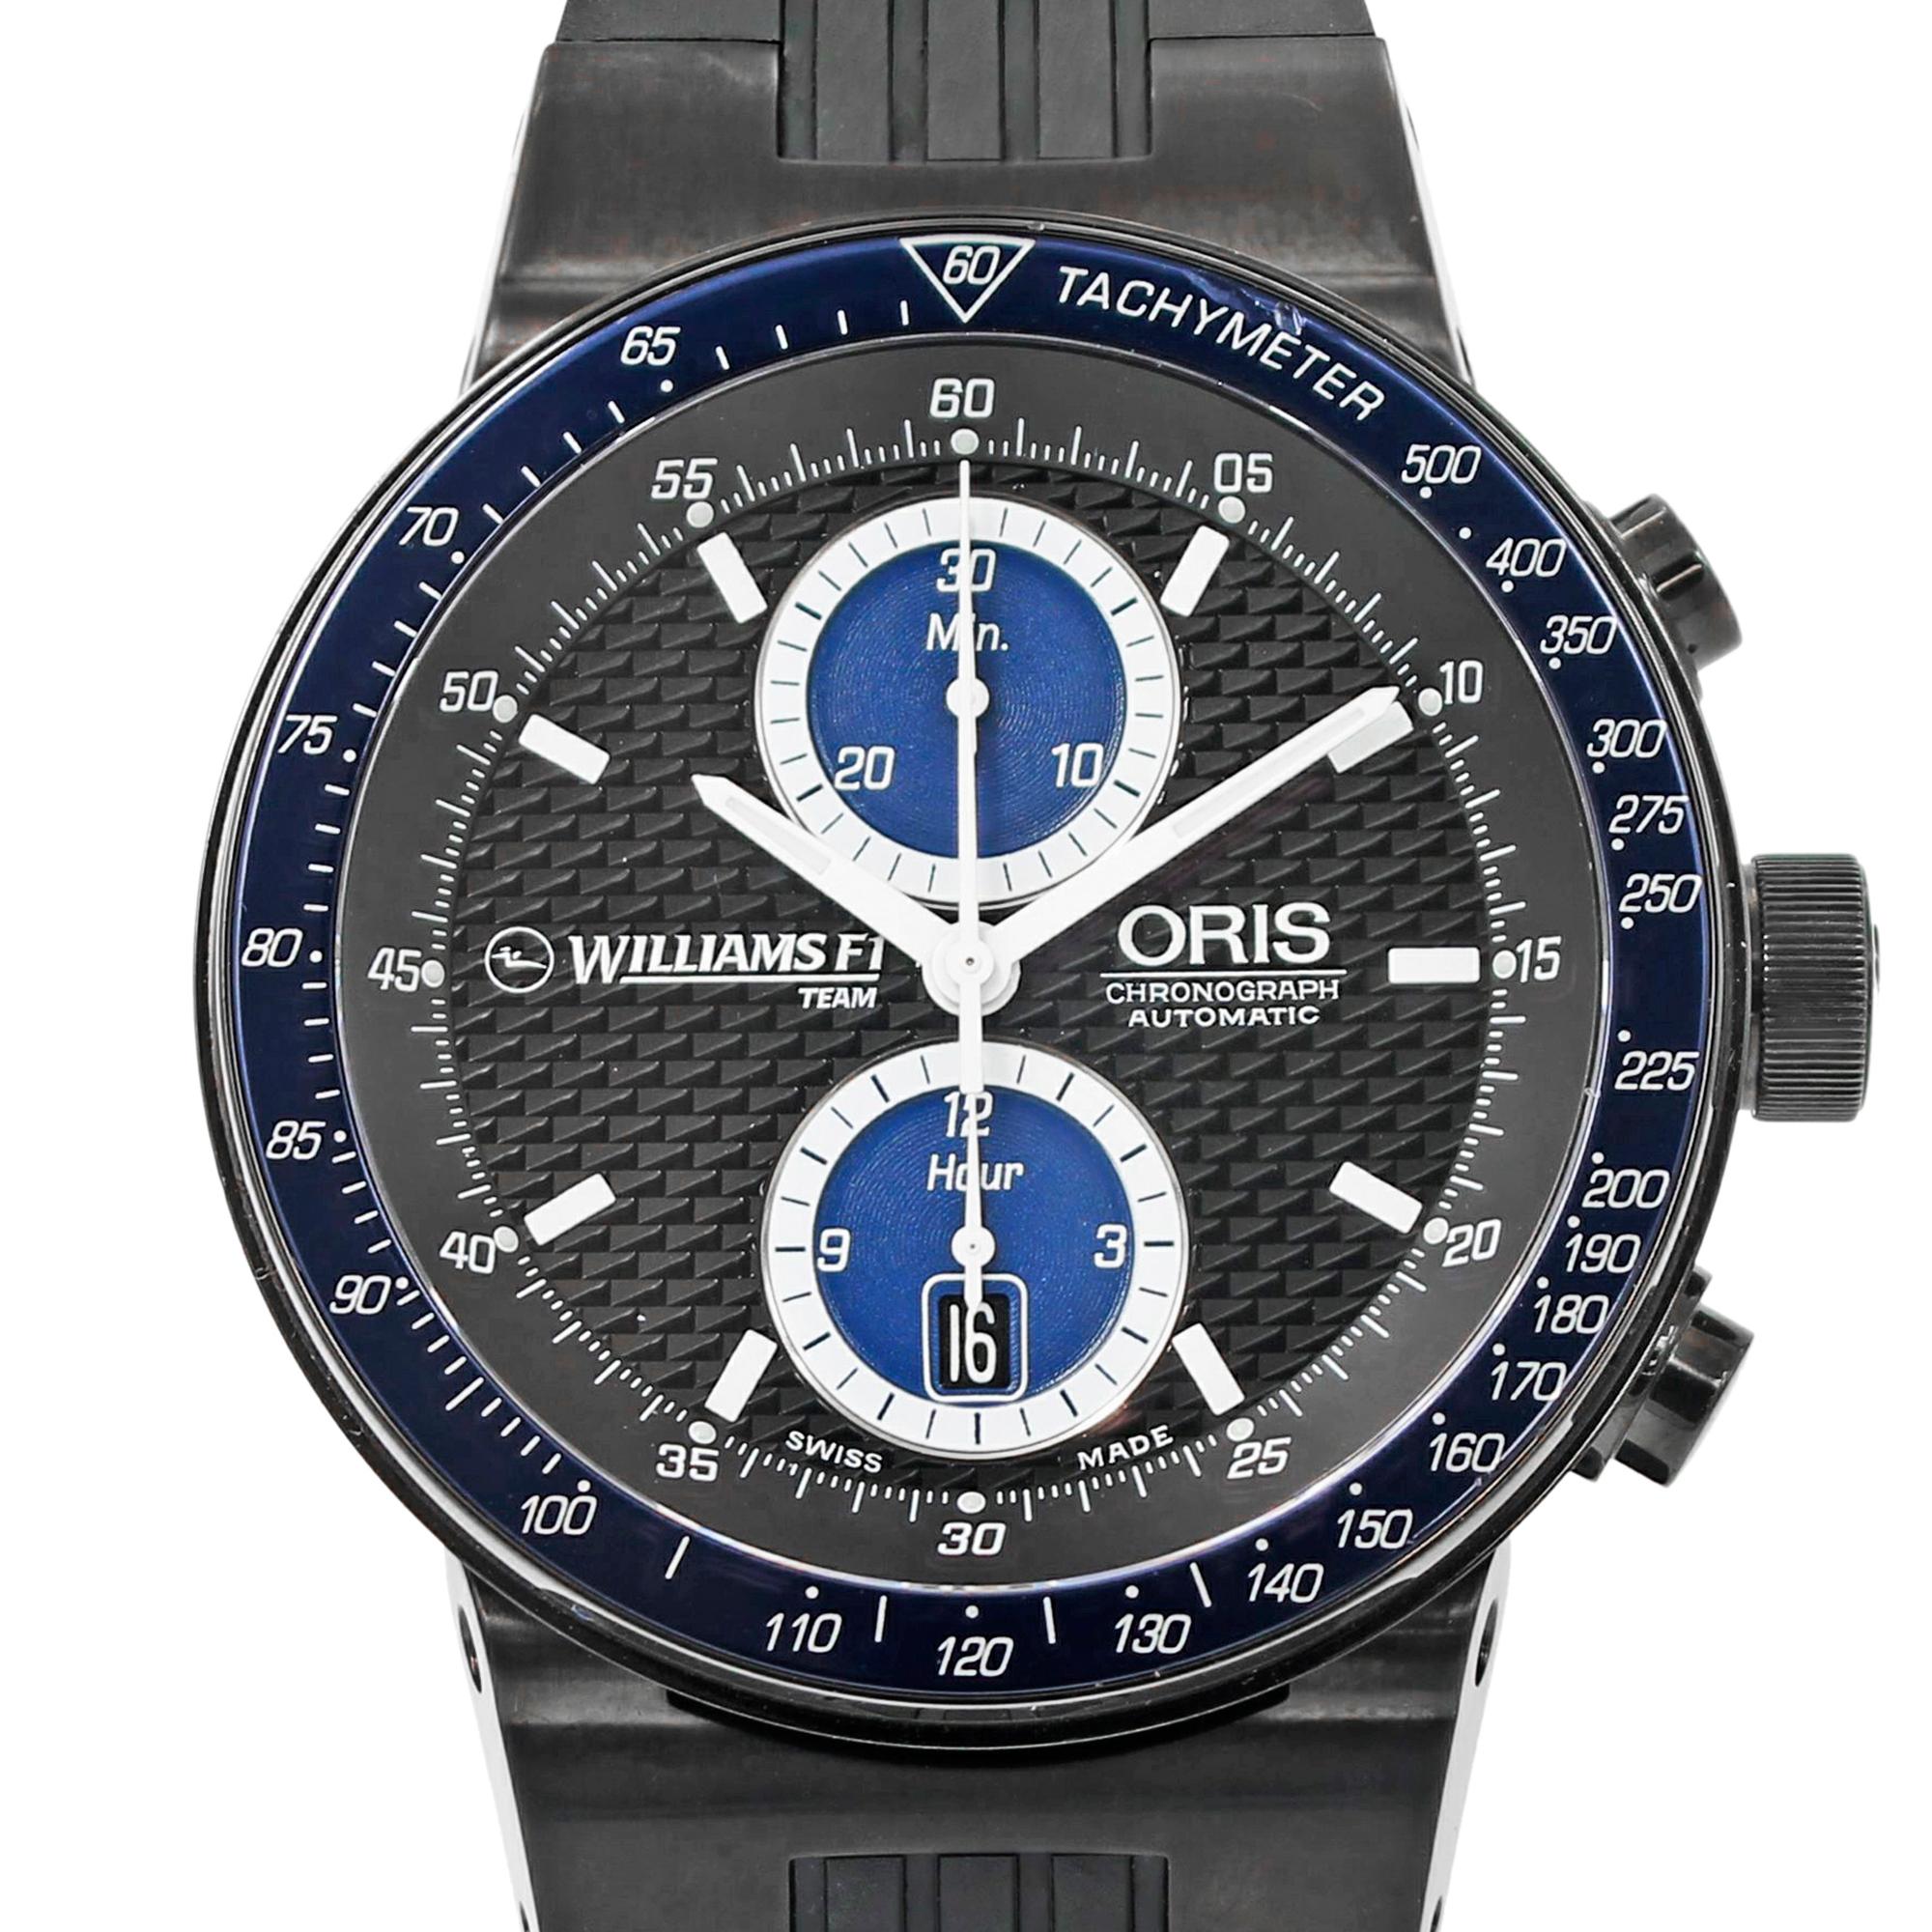 This pre-owned Oris Williams F1 Team 673-7563-4754RS is a beautiful men's timepiece that is powered by an automatic movement which is cased in a stainless steel case. It has a round shape face, chronograph, date, small seconds subdial, tachymeter